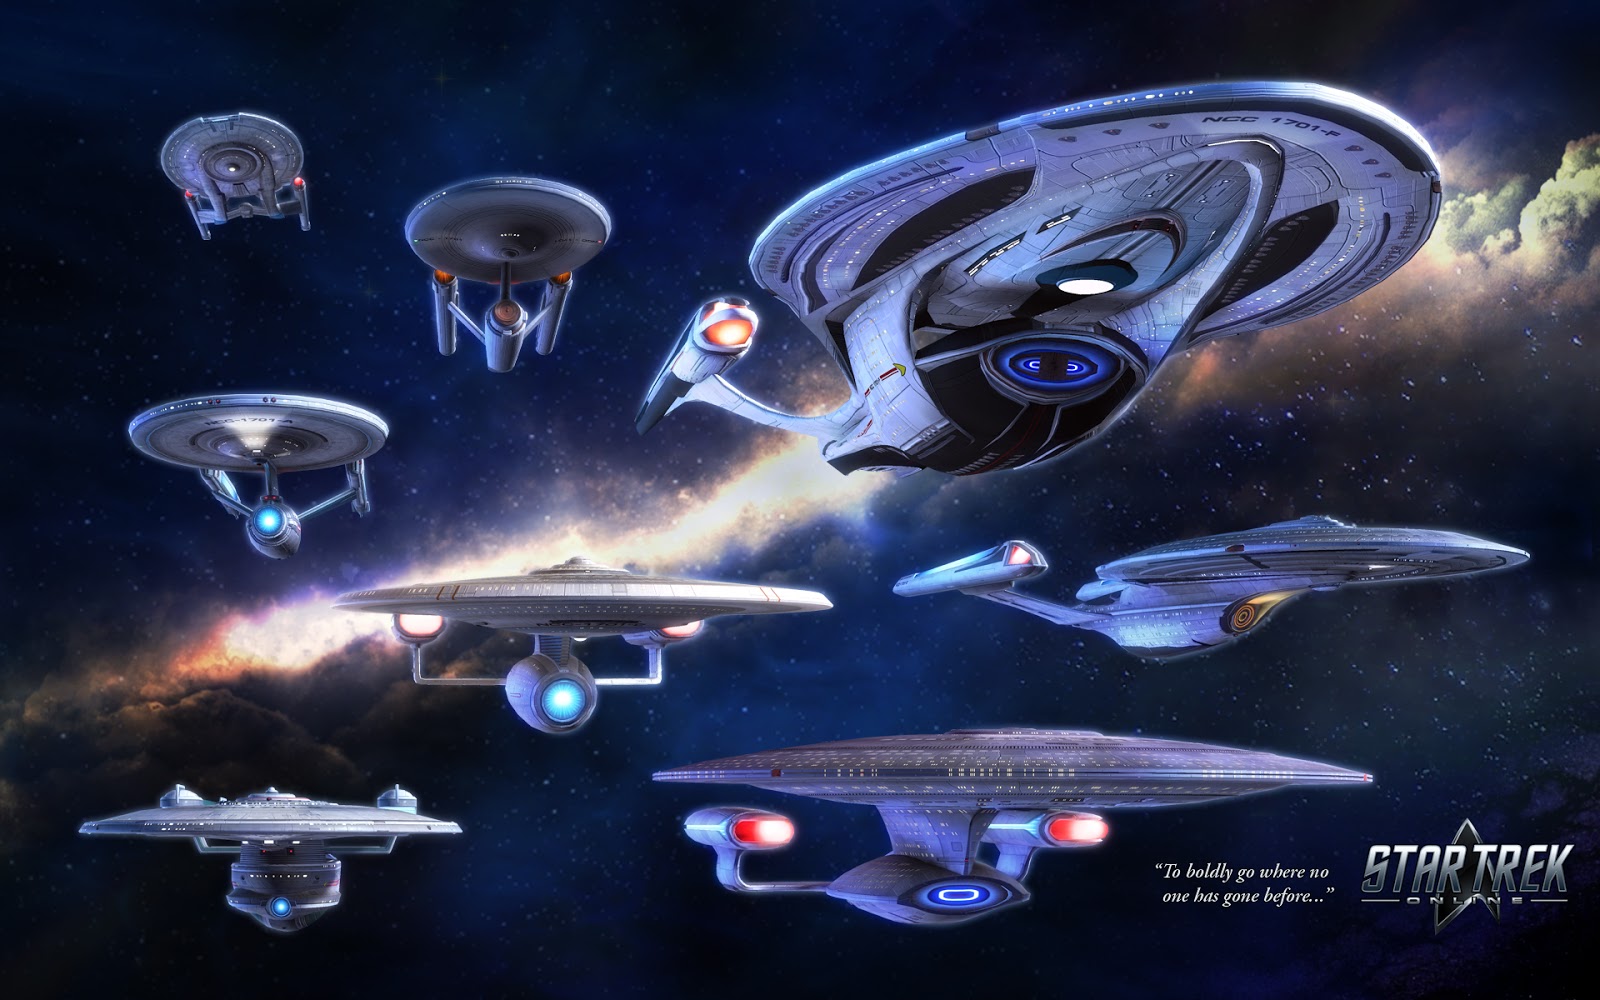 ufop-starbase-118-the-life-and-times-part-2-ufop-starbase-118-star-trek-rpg